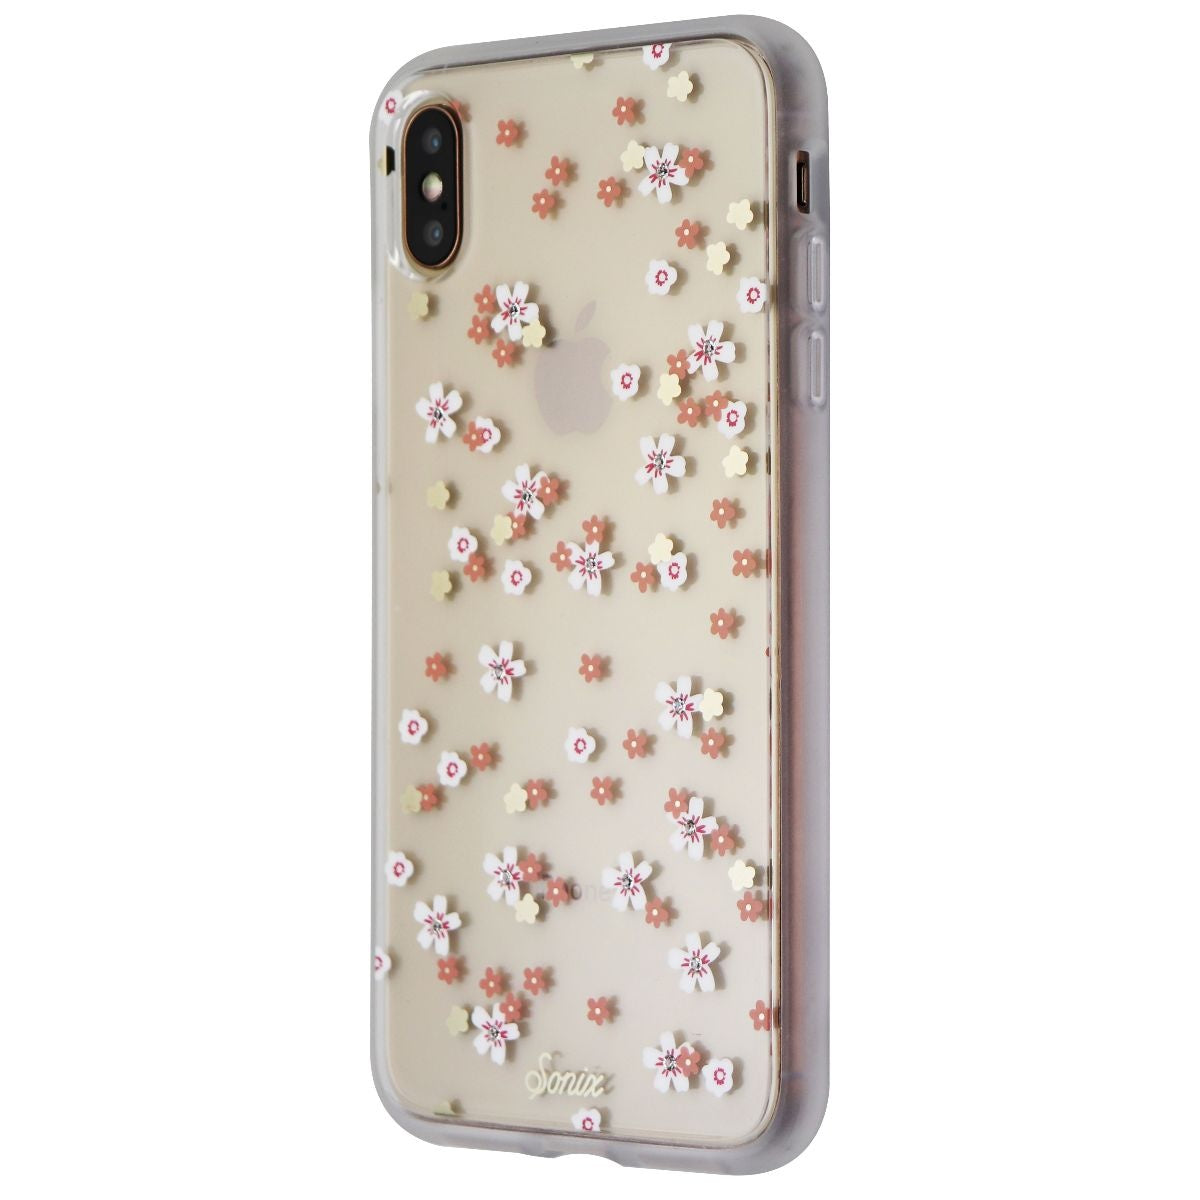 Sonix Floral Rhinestone Embellished Protective Clear Case for iPhone X